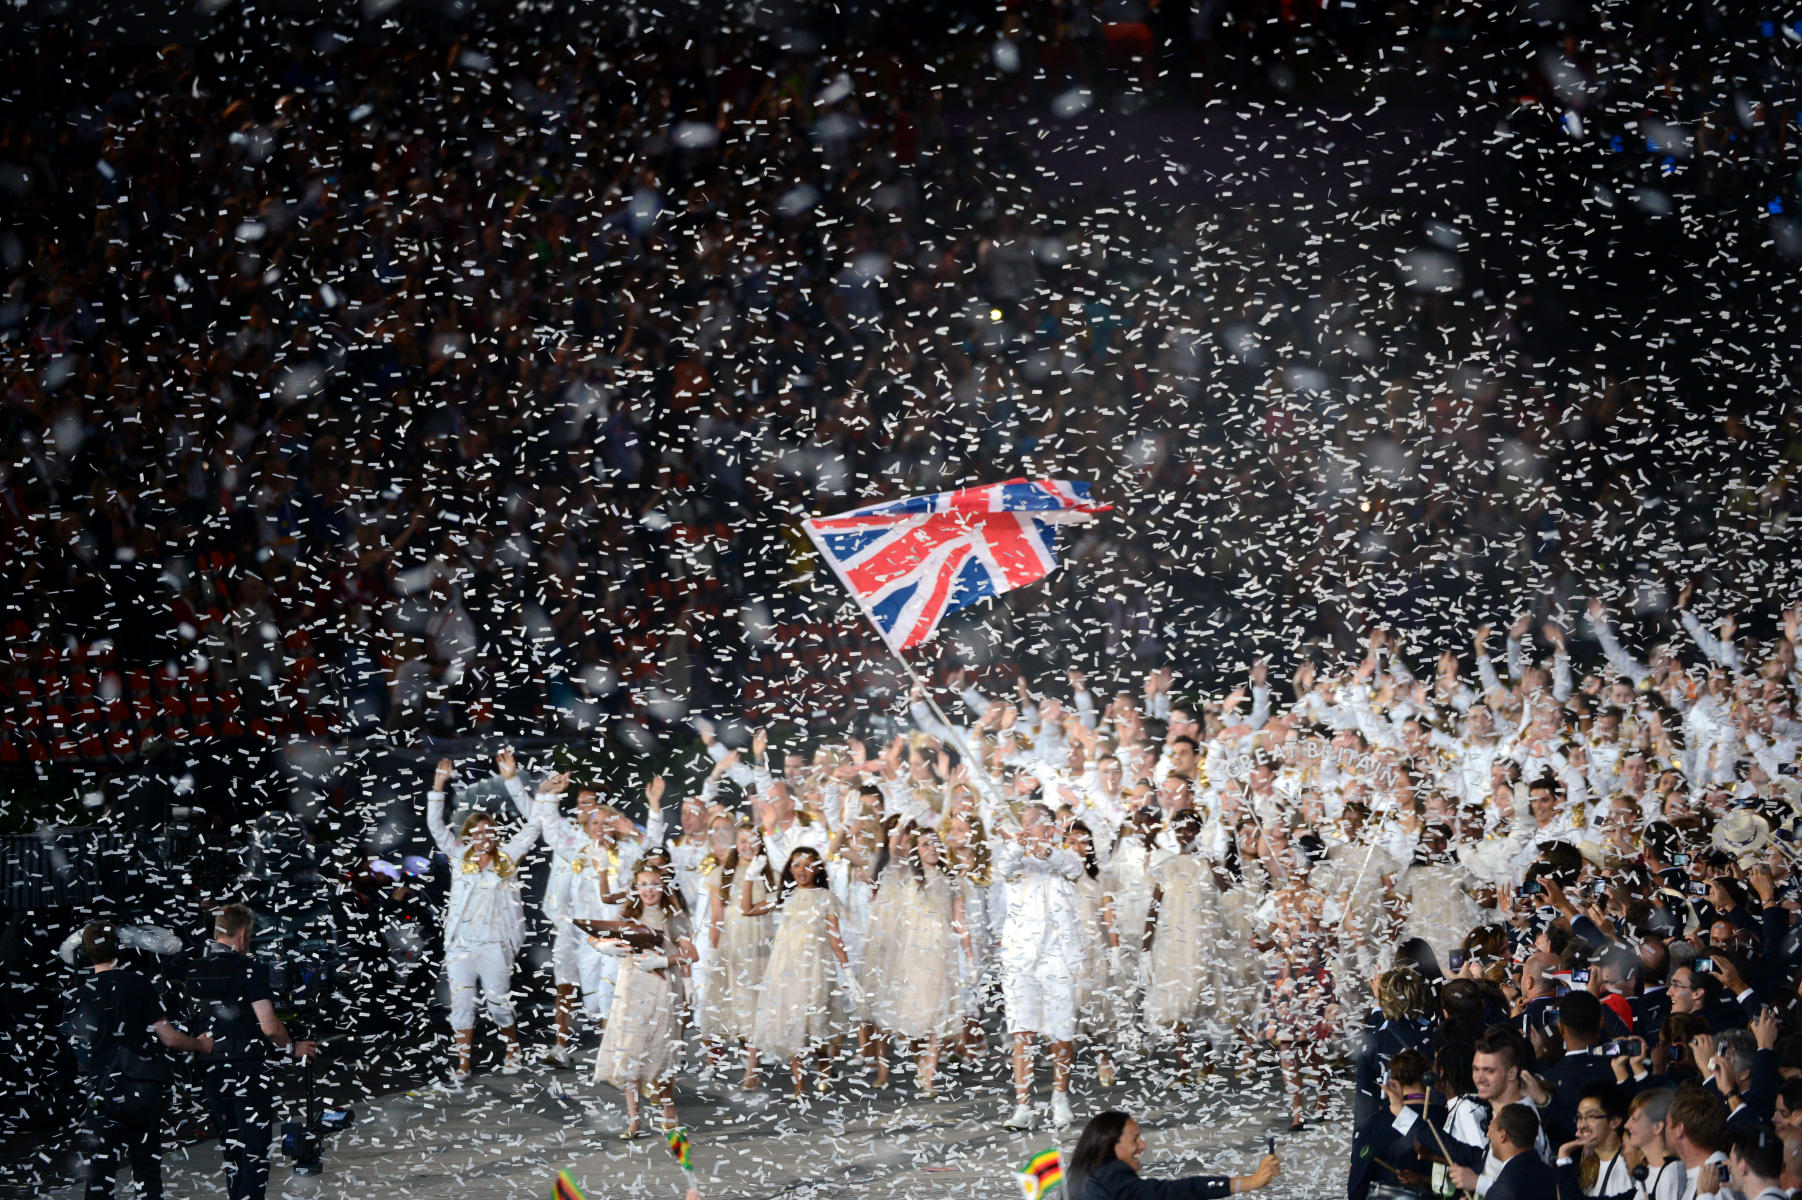 Great Britain team entering the Olympic Stadium during the Opening Ceremonies of the London Olympics. : Olympics : Photography by Adam Stoltman: Sports Photography, The Arts, Portraiture, Travel, Photojournalism and Fine Art in New York